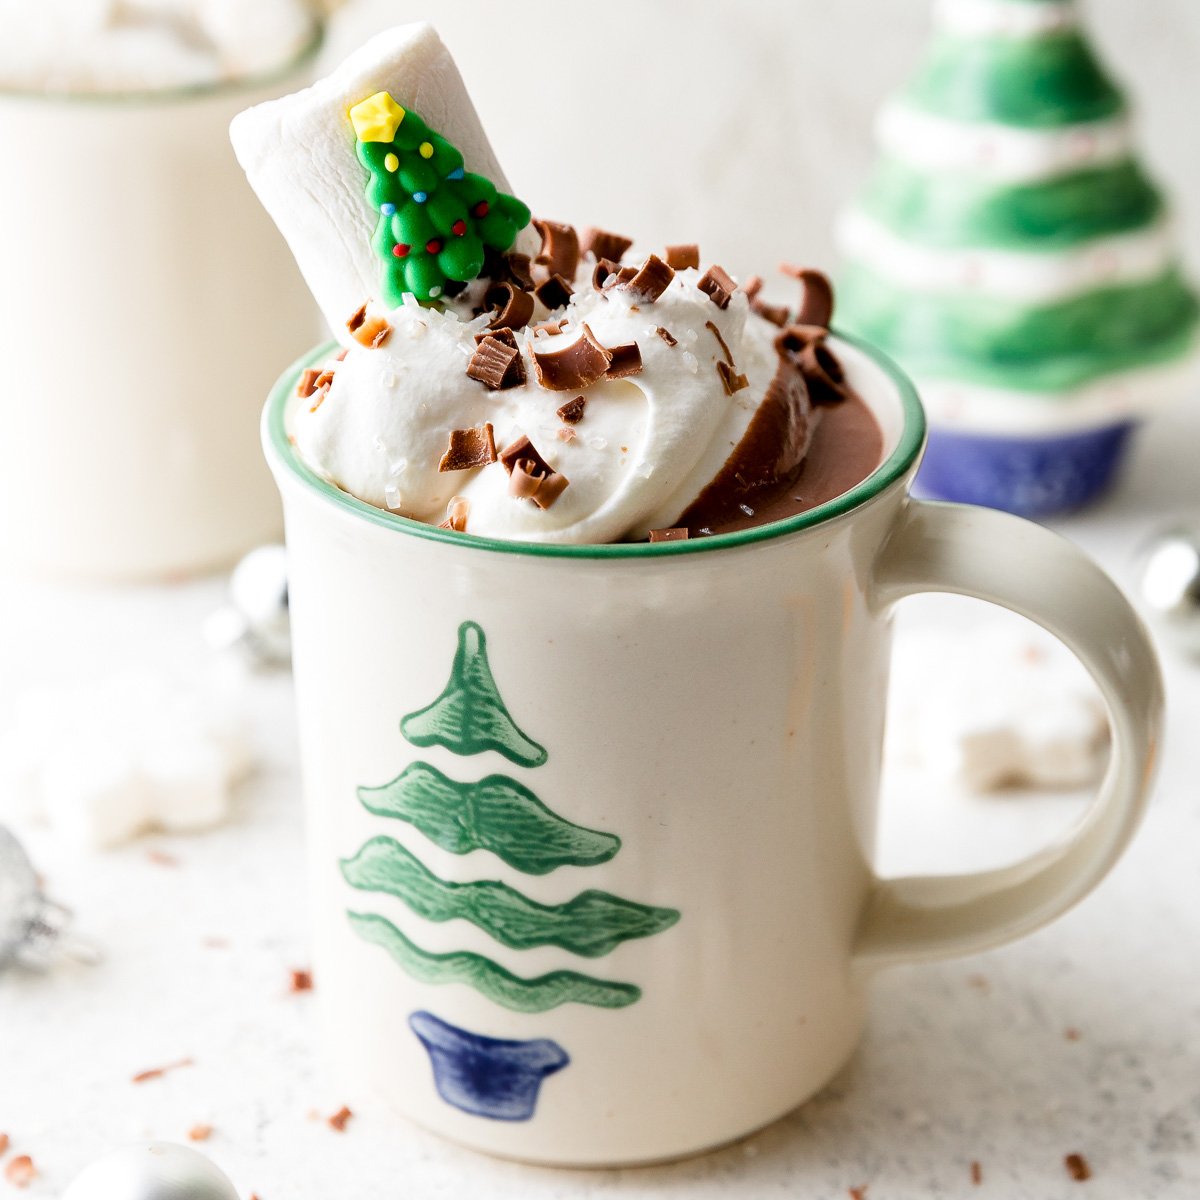 https://playswellwithbutter.com/wp-content/uploads/2021/12/Christmas-Morning-Hot-Cocoa-19.jpg